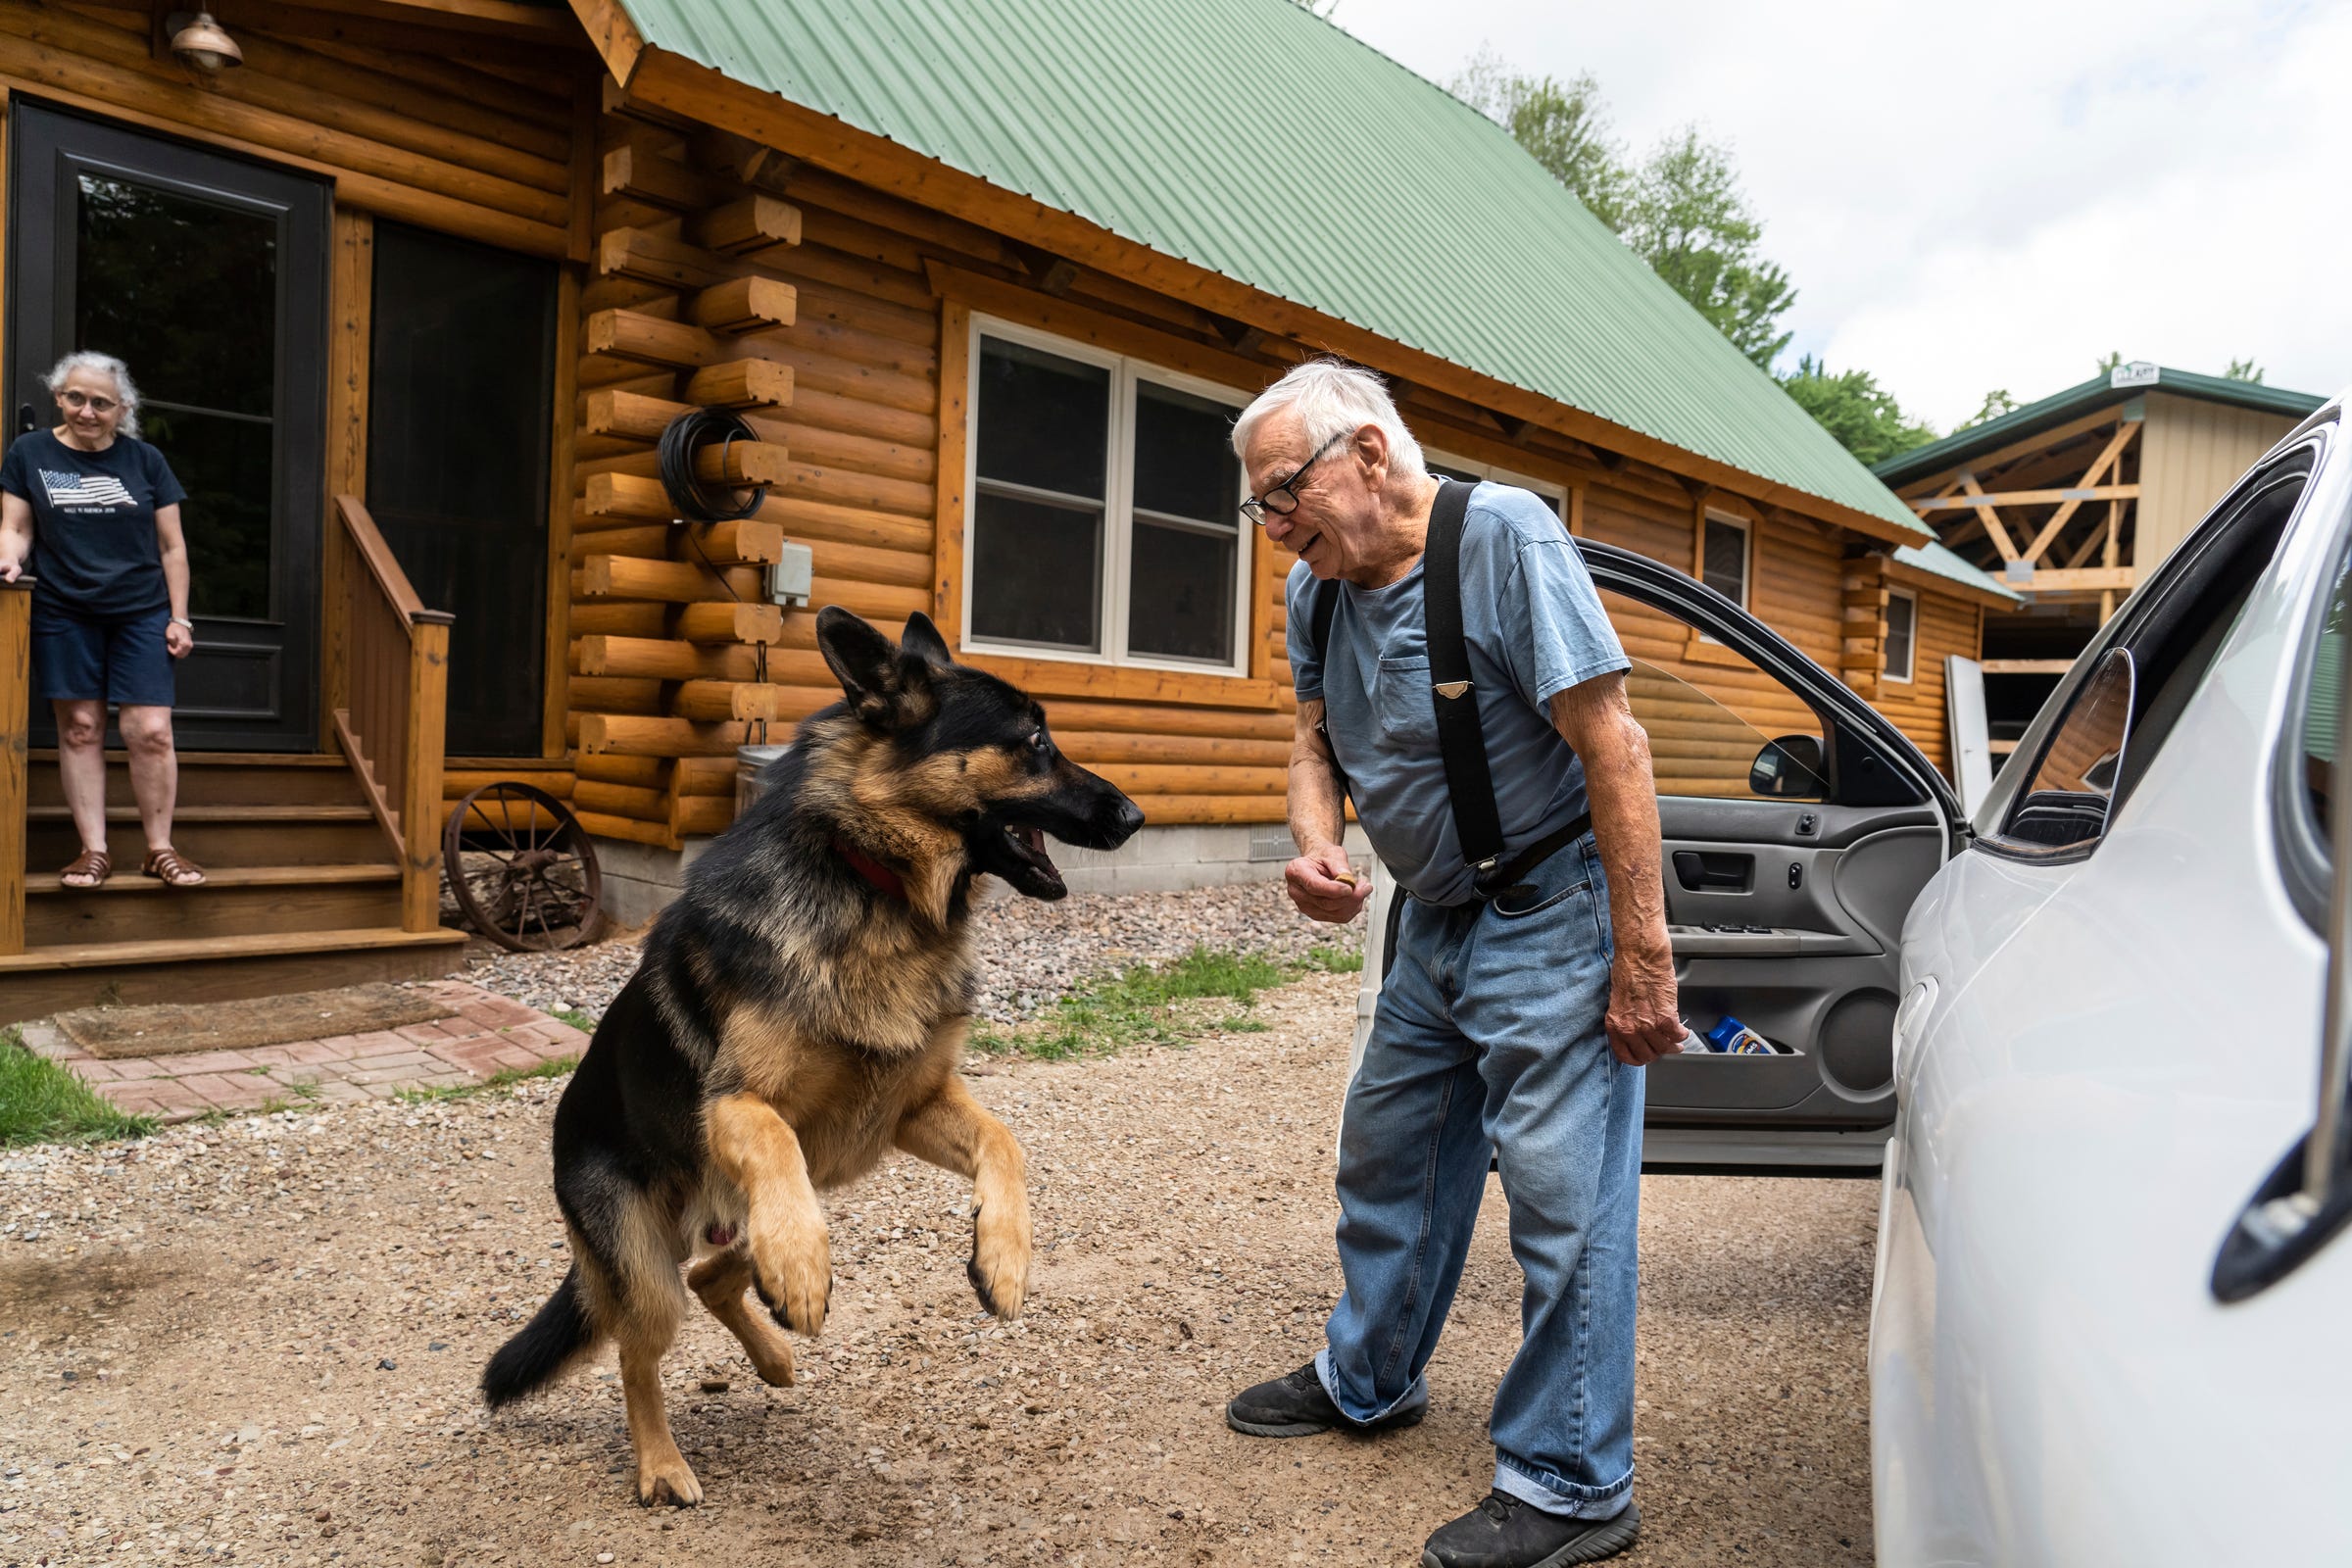 Mailman Ron Curtis, 86, holds a treat for an energetic German shepherd named Nuttah that he stops to visit along his postal route in Michigan's Upper Peninsula on Wednesday, July 27, 2022 as homeowner Leonor Hendrickson, 64, looks on.